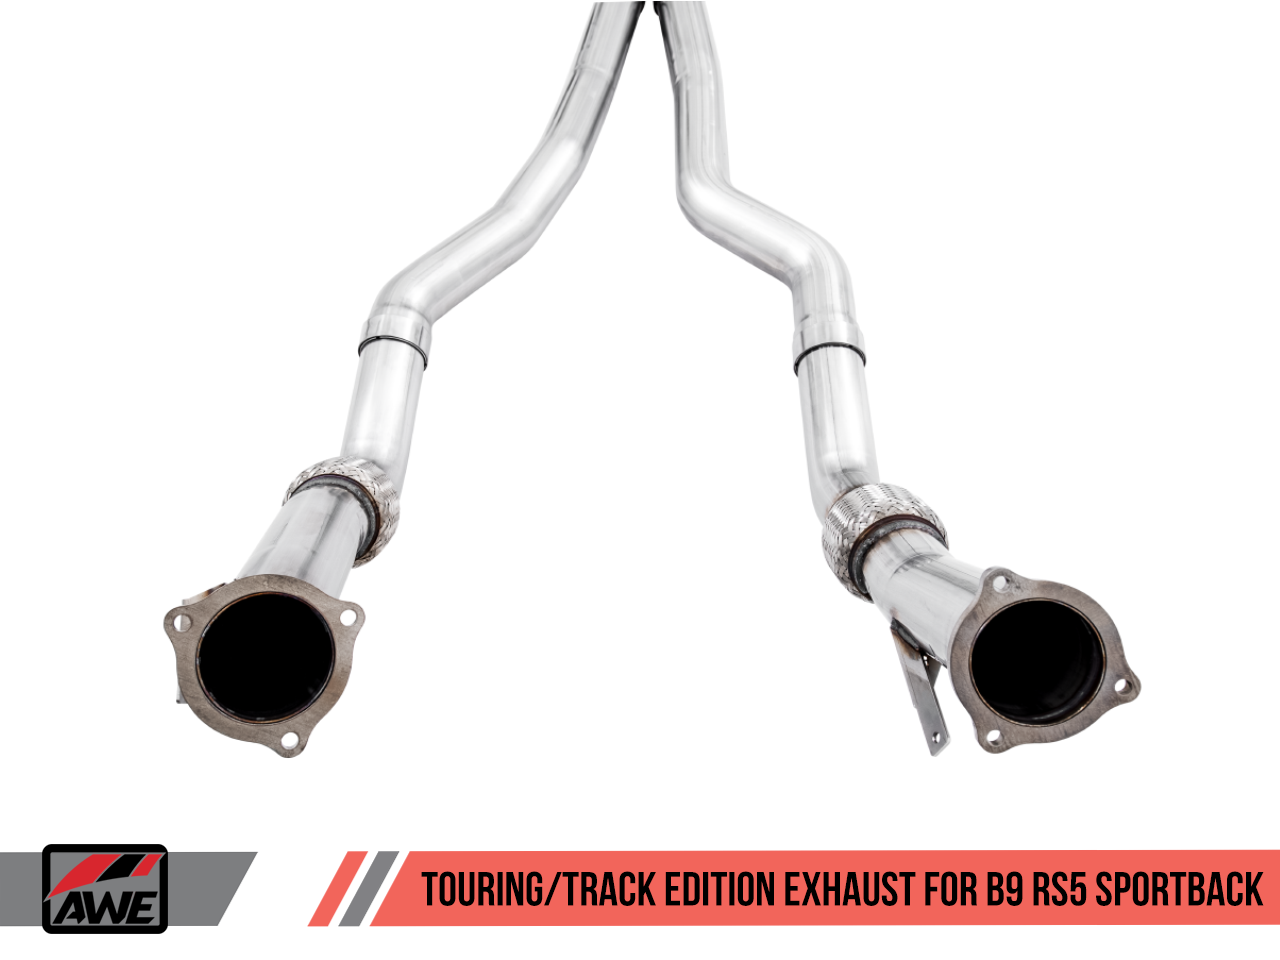 AWE Tuning Track Edition Exhaust for Audi B9 RS 5 Sportback - Resonated for Performance Catalysts - Diamond Black RS-style Tips